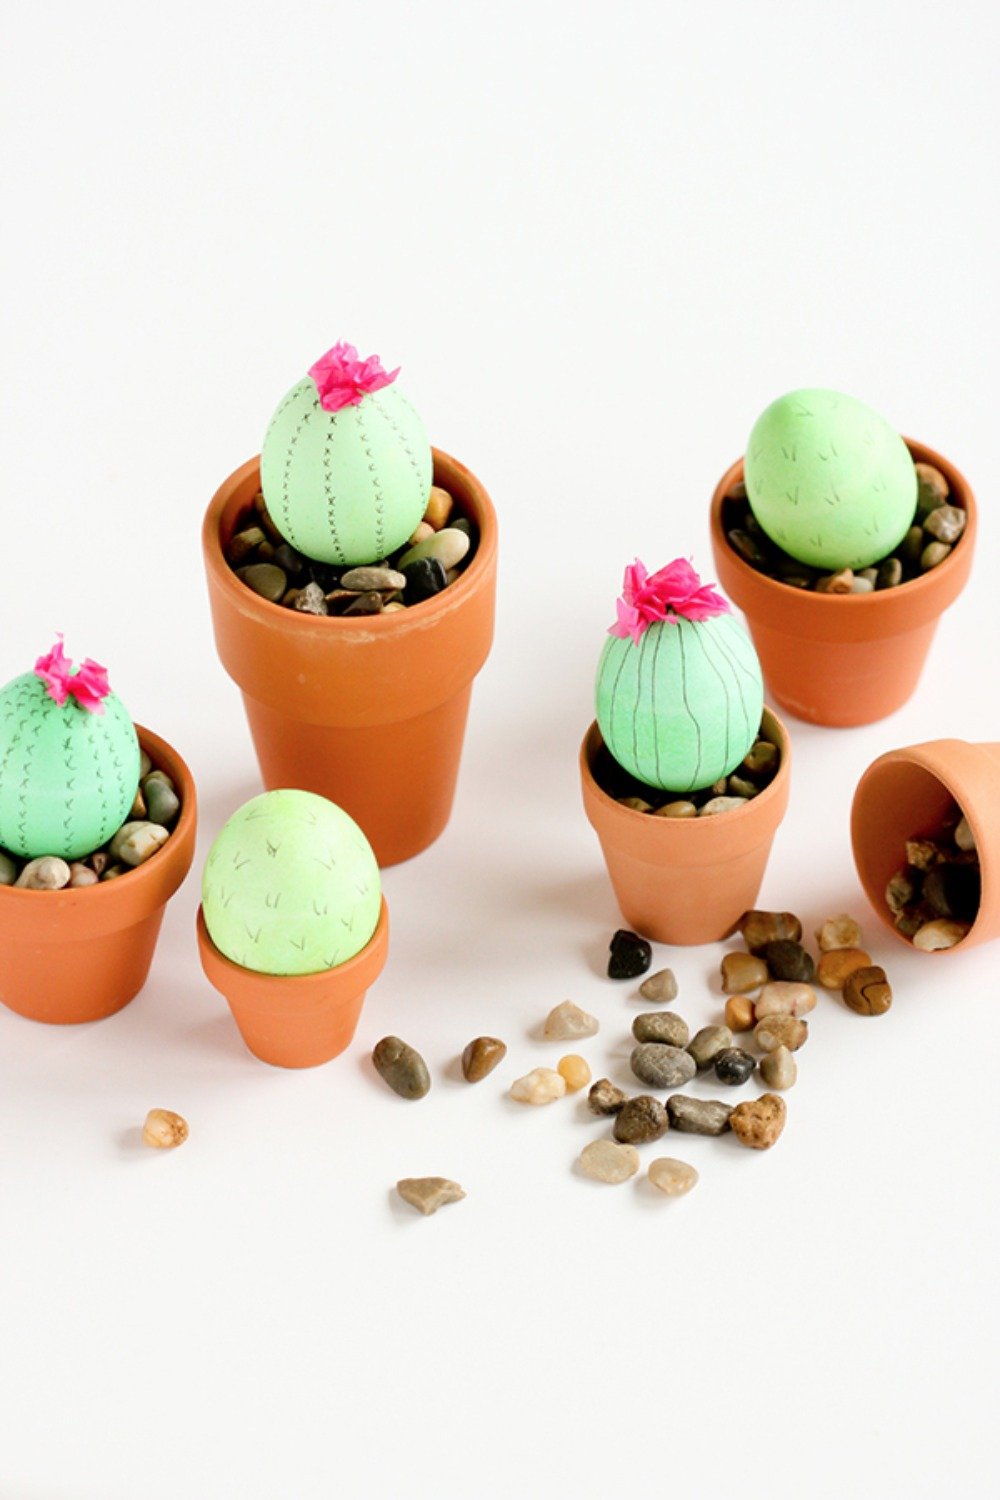 Cactus-Easter-Eggs-14-of-300307